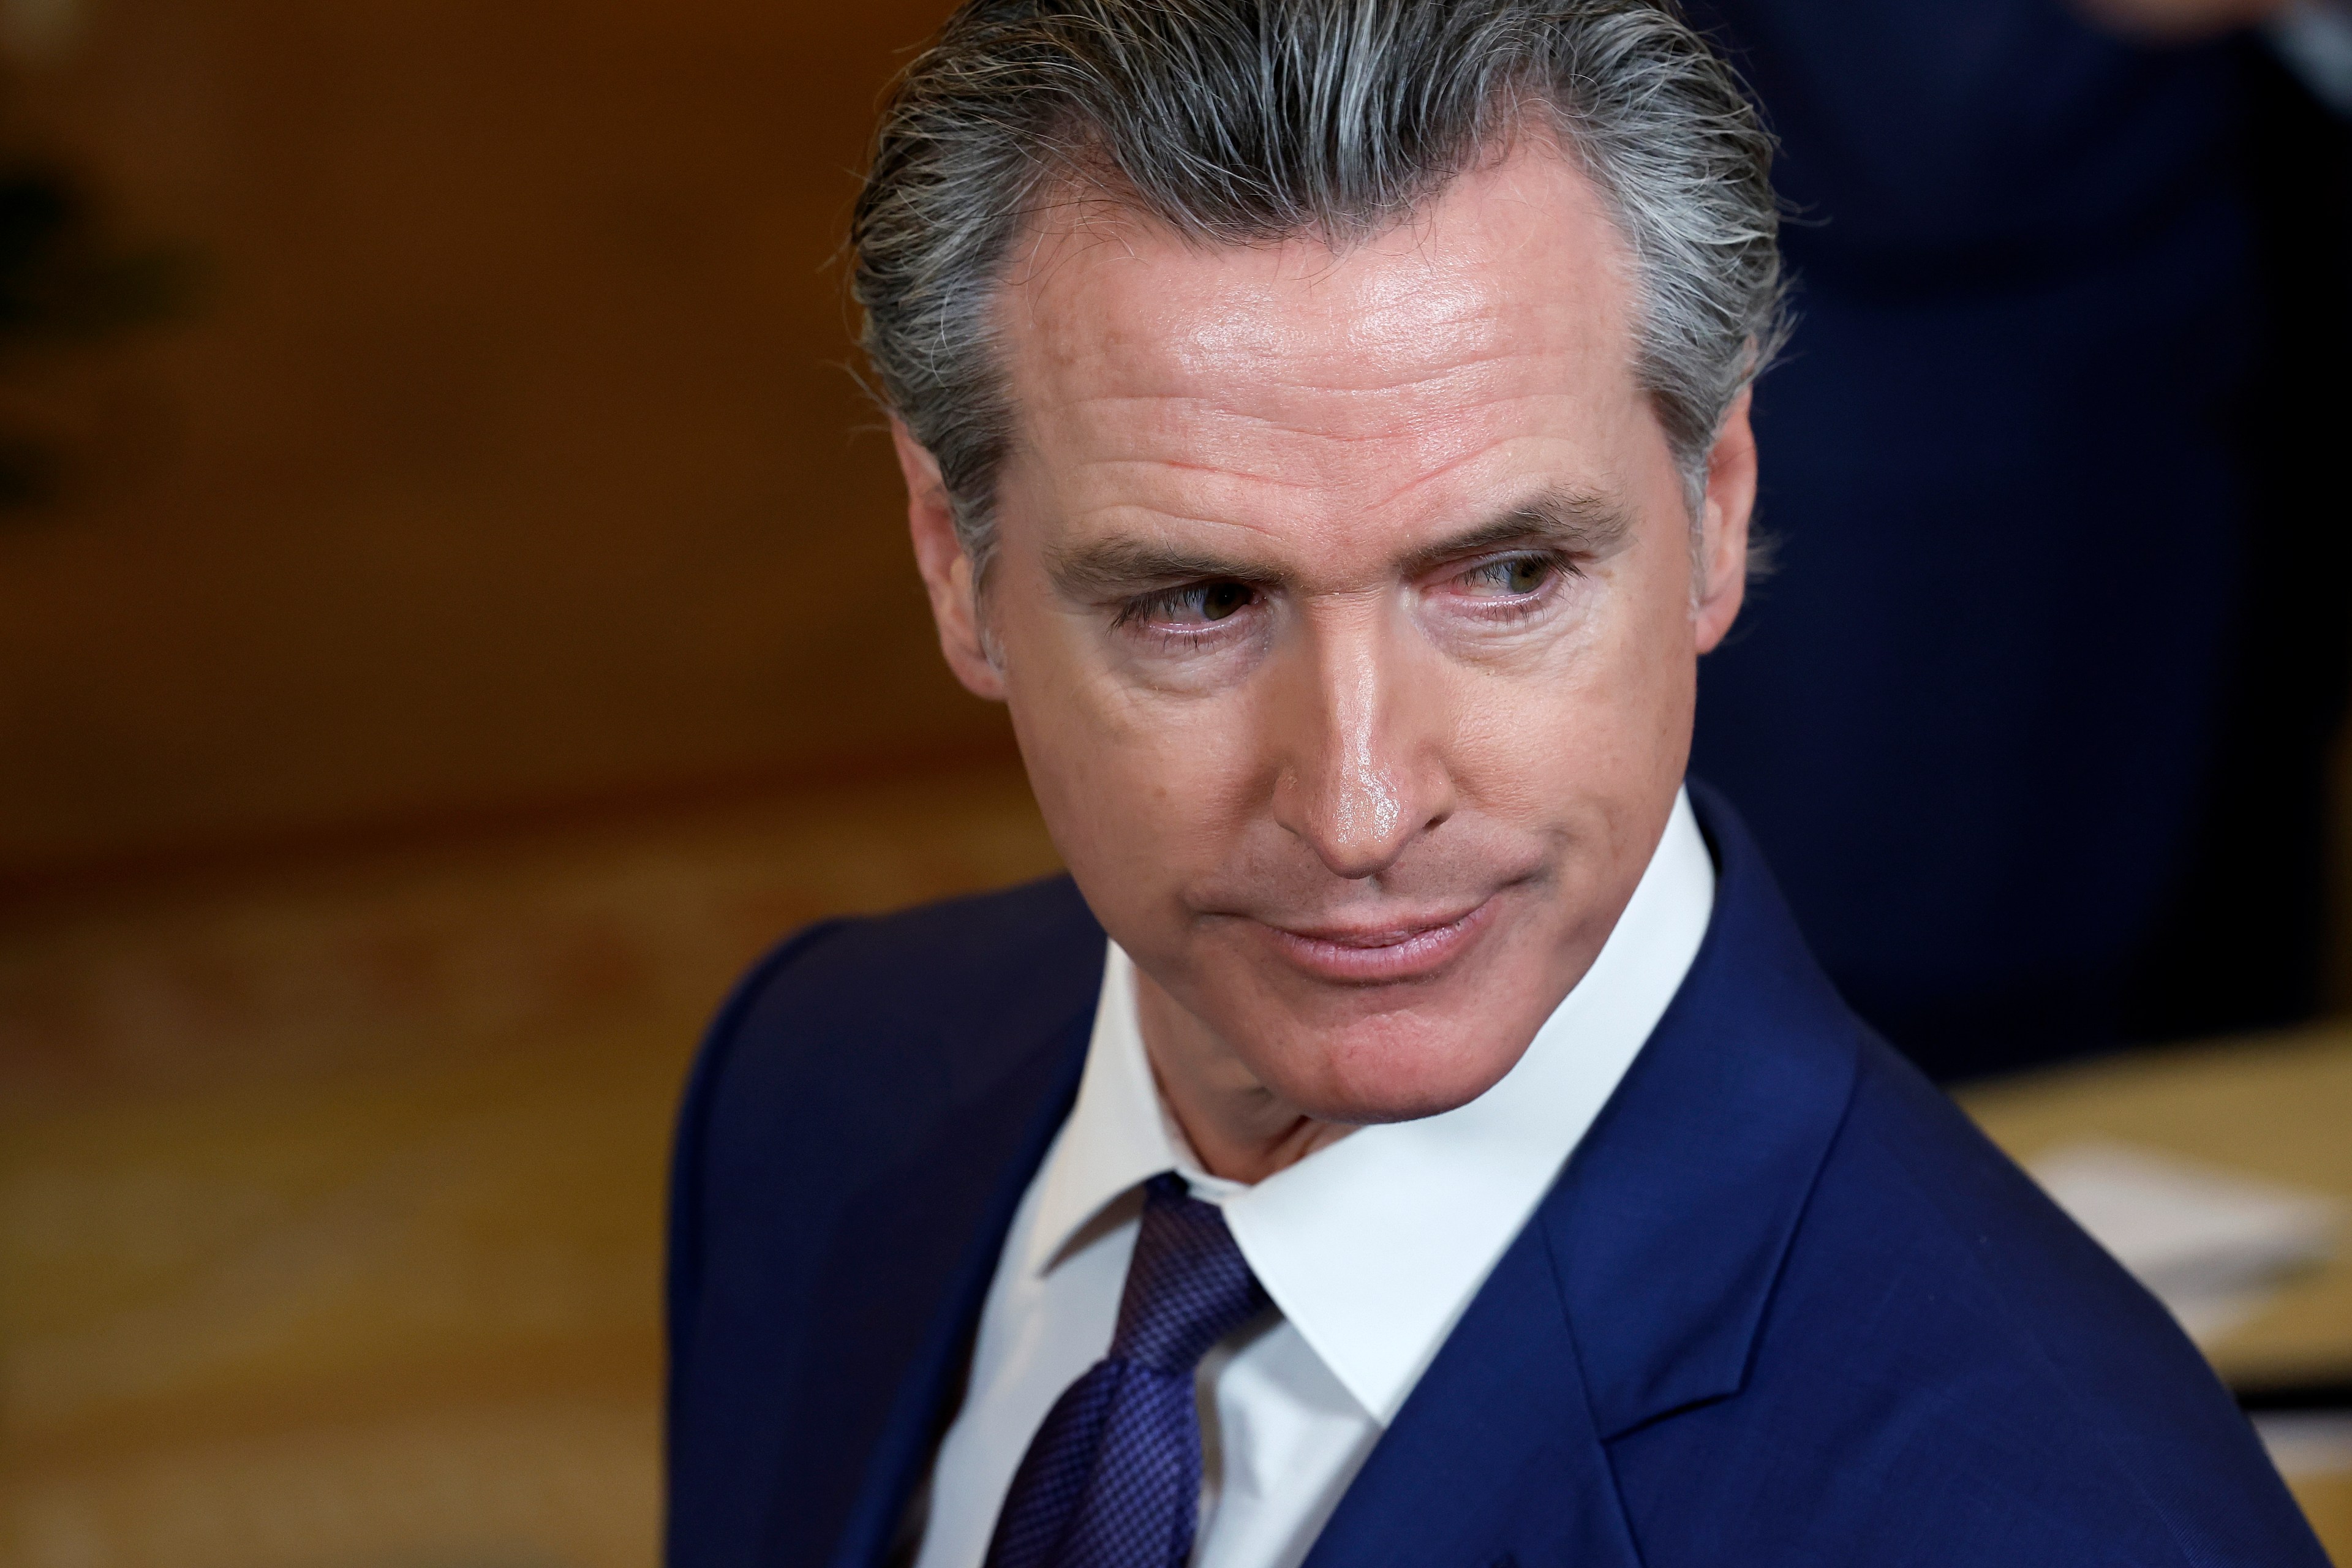 A man in a blue suit and tie looks to his left with a serious expression, set against a blurred, warm-toned background.